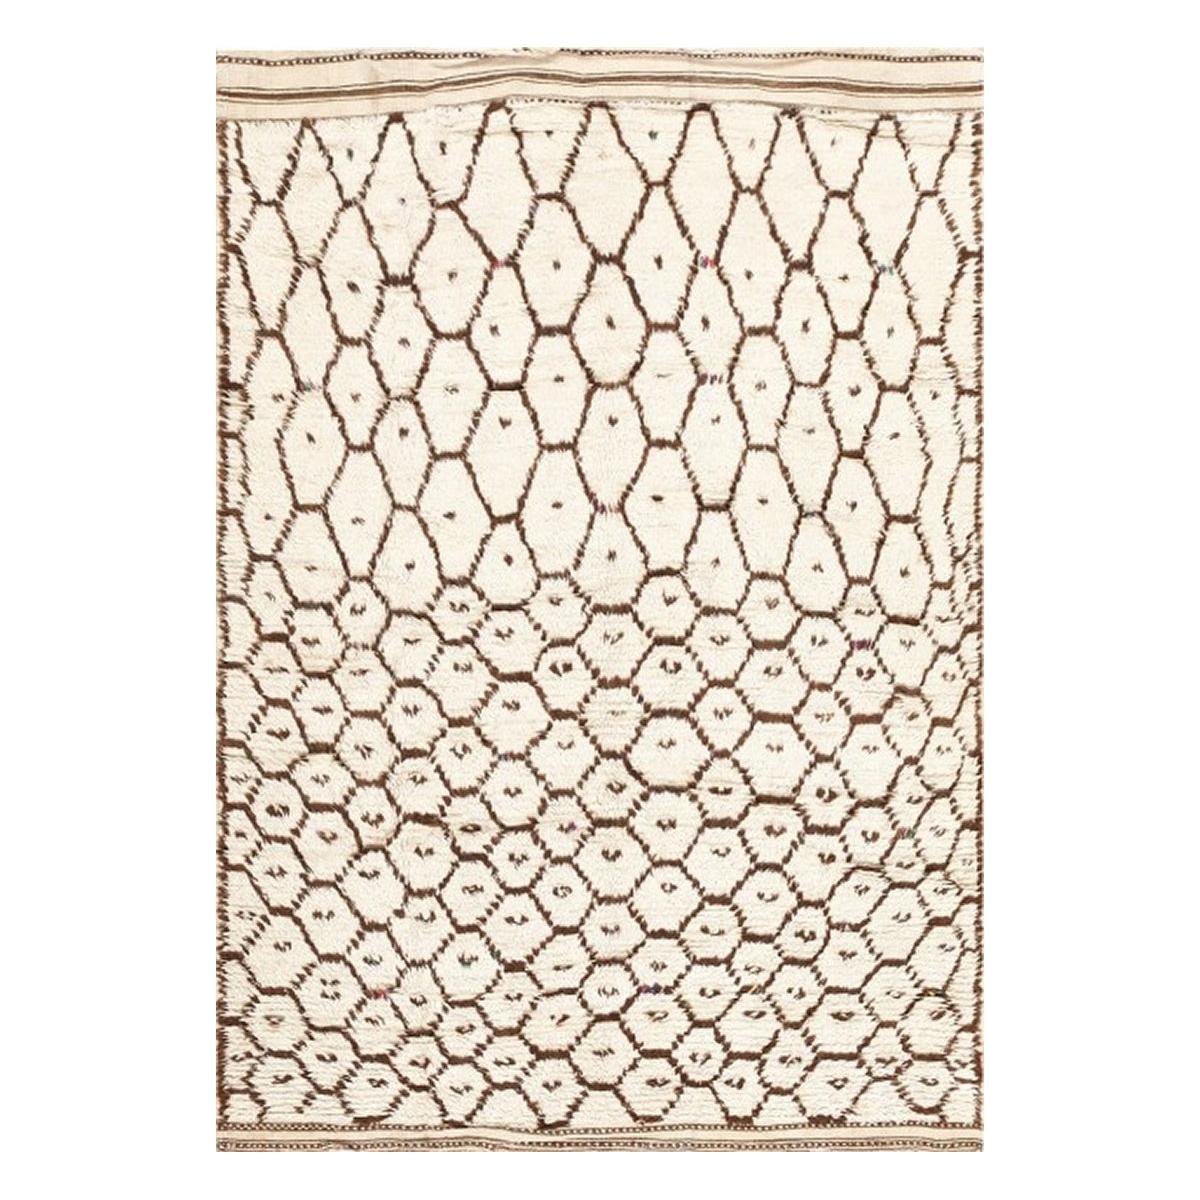 Tapis marocain vintage. Taille : 4 ft 9 in x 7 ft